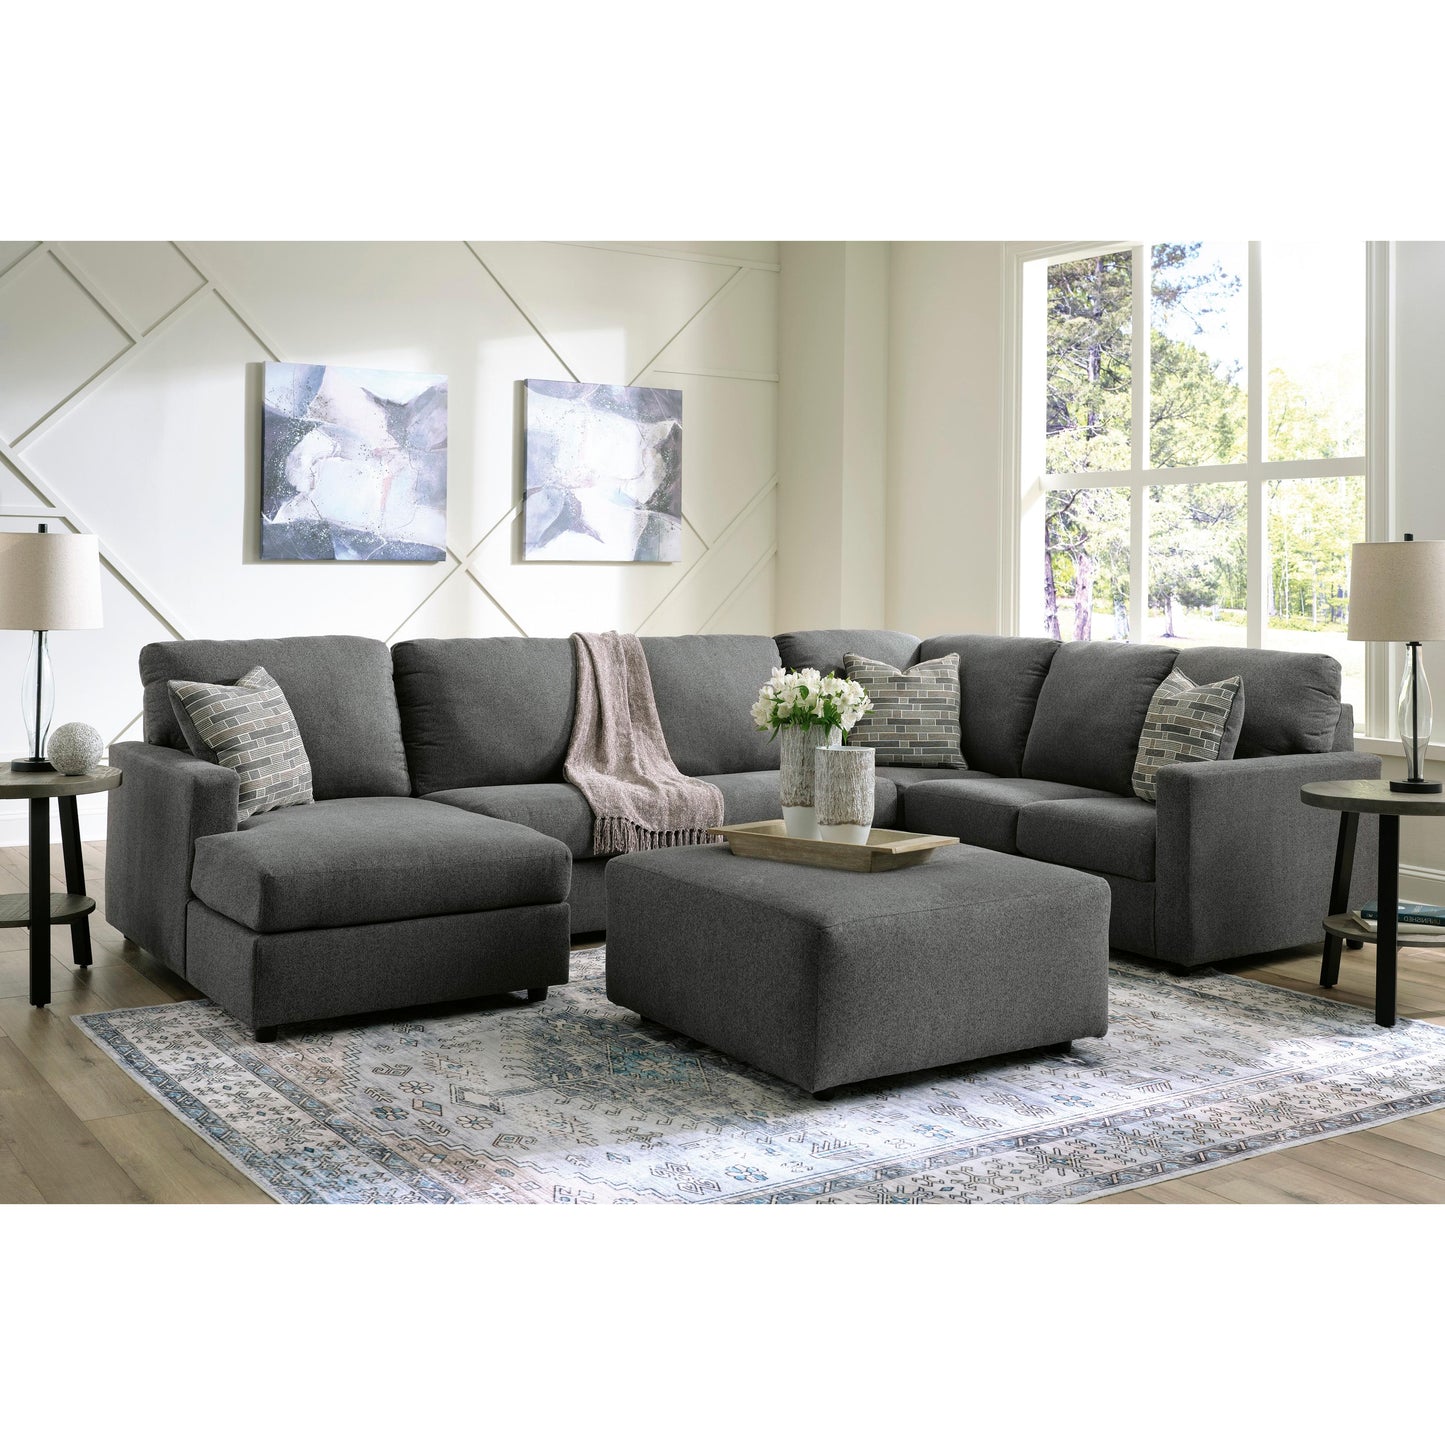 Signature Design by Ashley Edenfield Fabric 3 pc Sectional 2900316/2900334/2900349 IMAGE 5